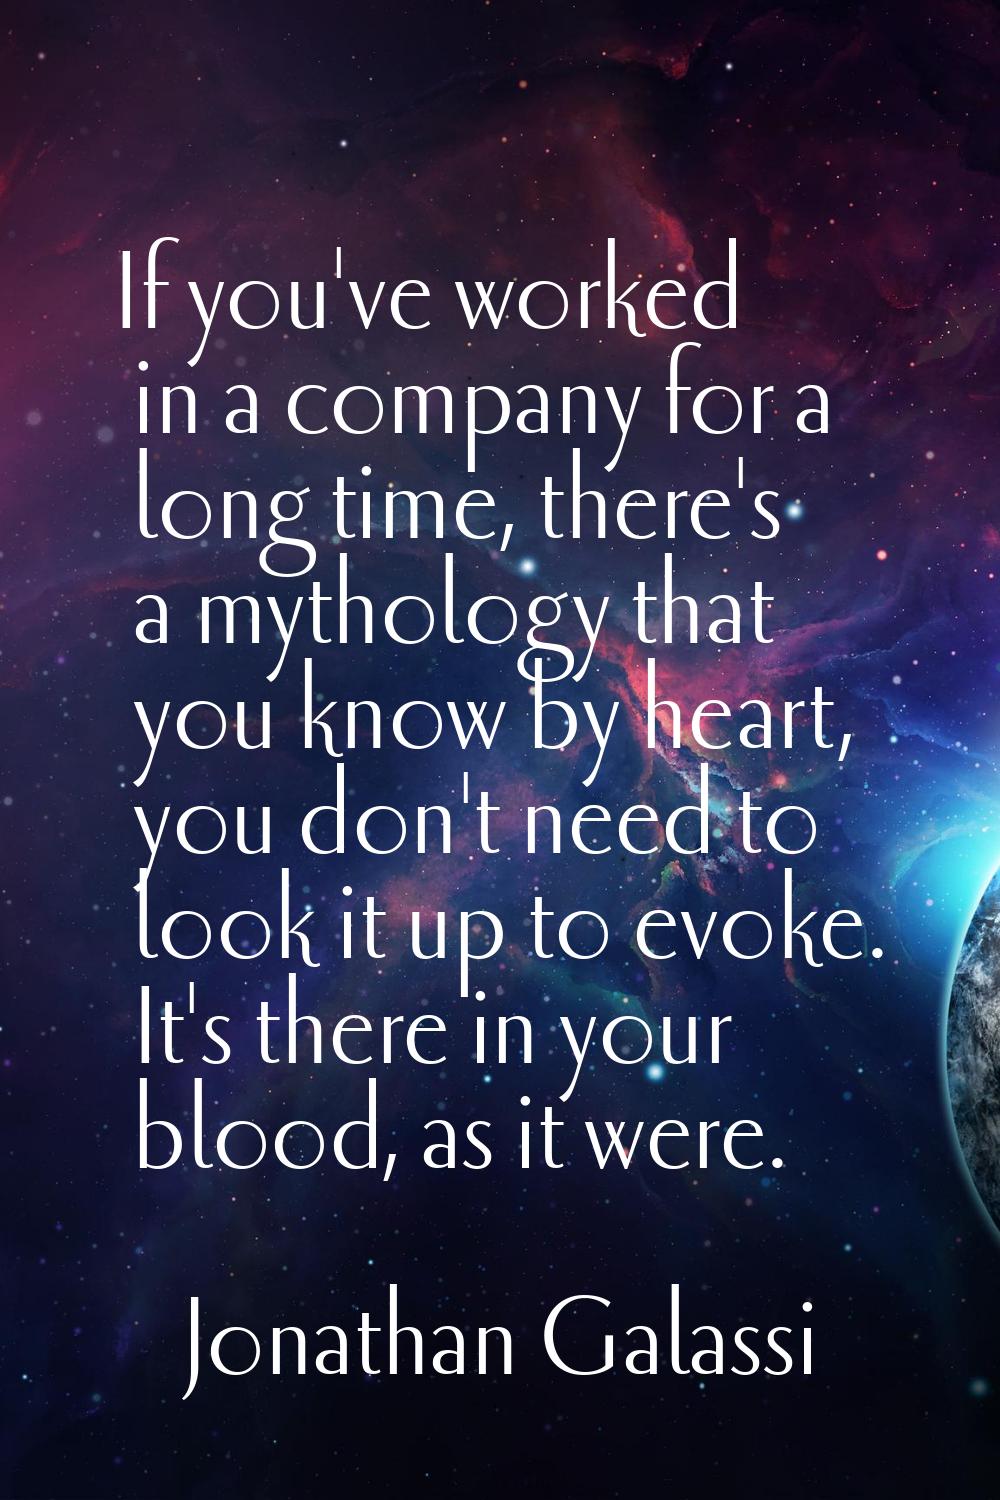 If you've worked in a company for a long time, there's a mythology that you know by heart, you don'